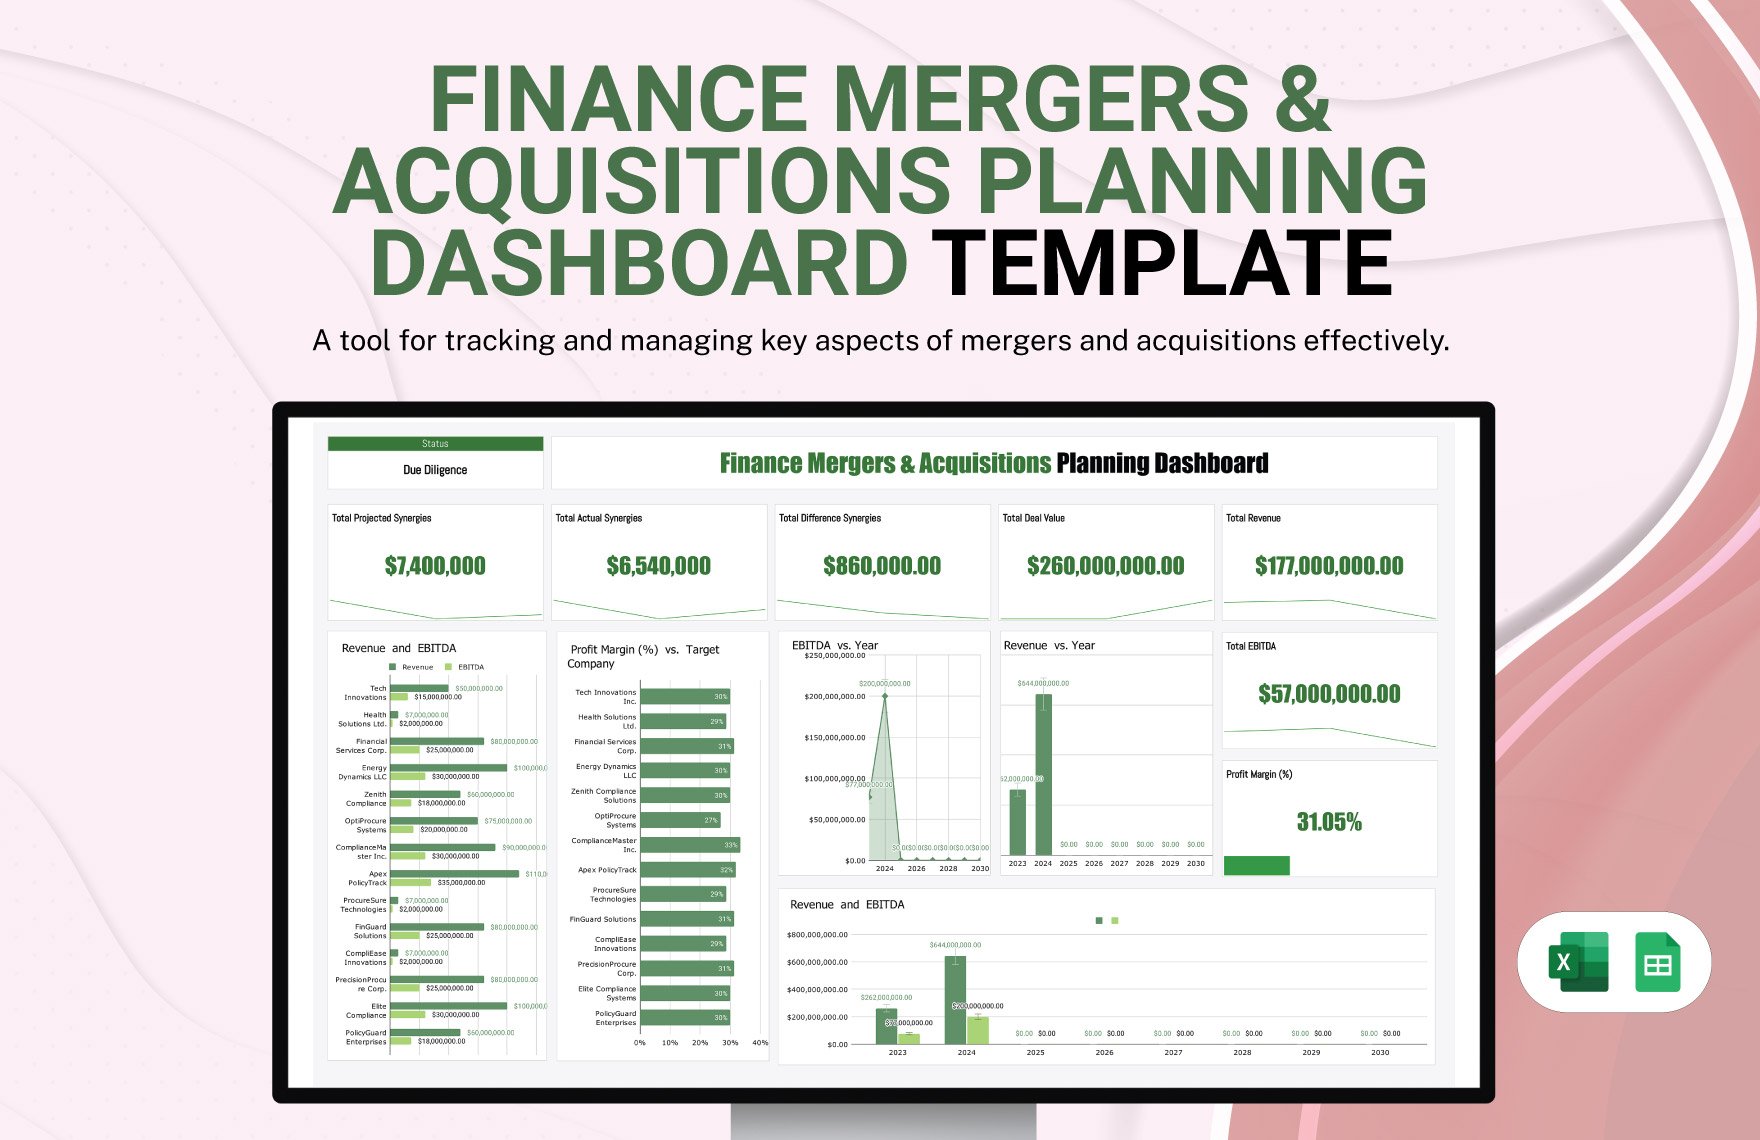 Finance Mergers & Acquisitions Planning Dashboard Template